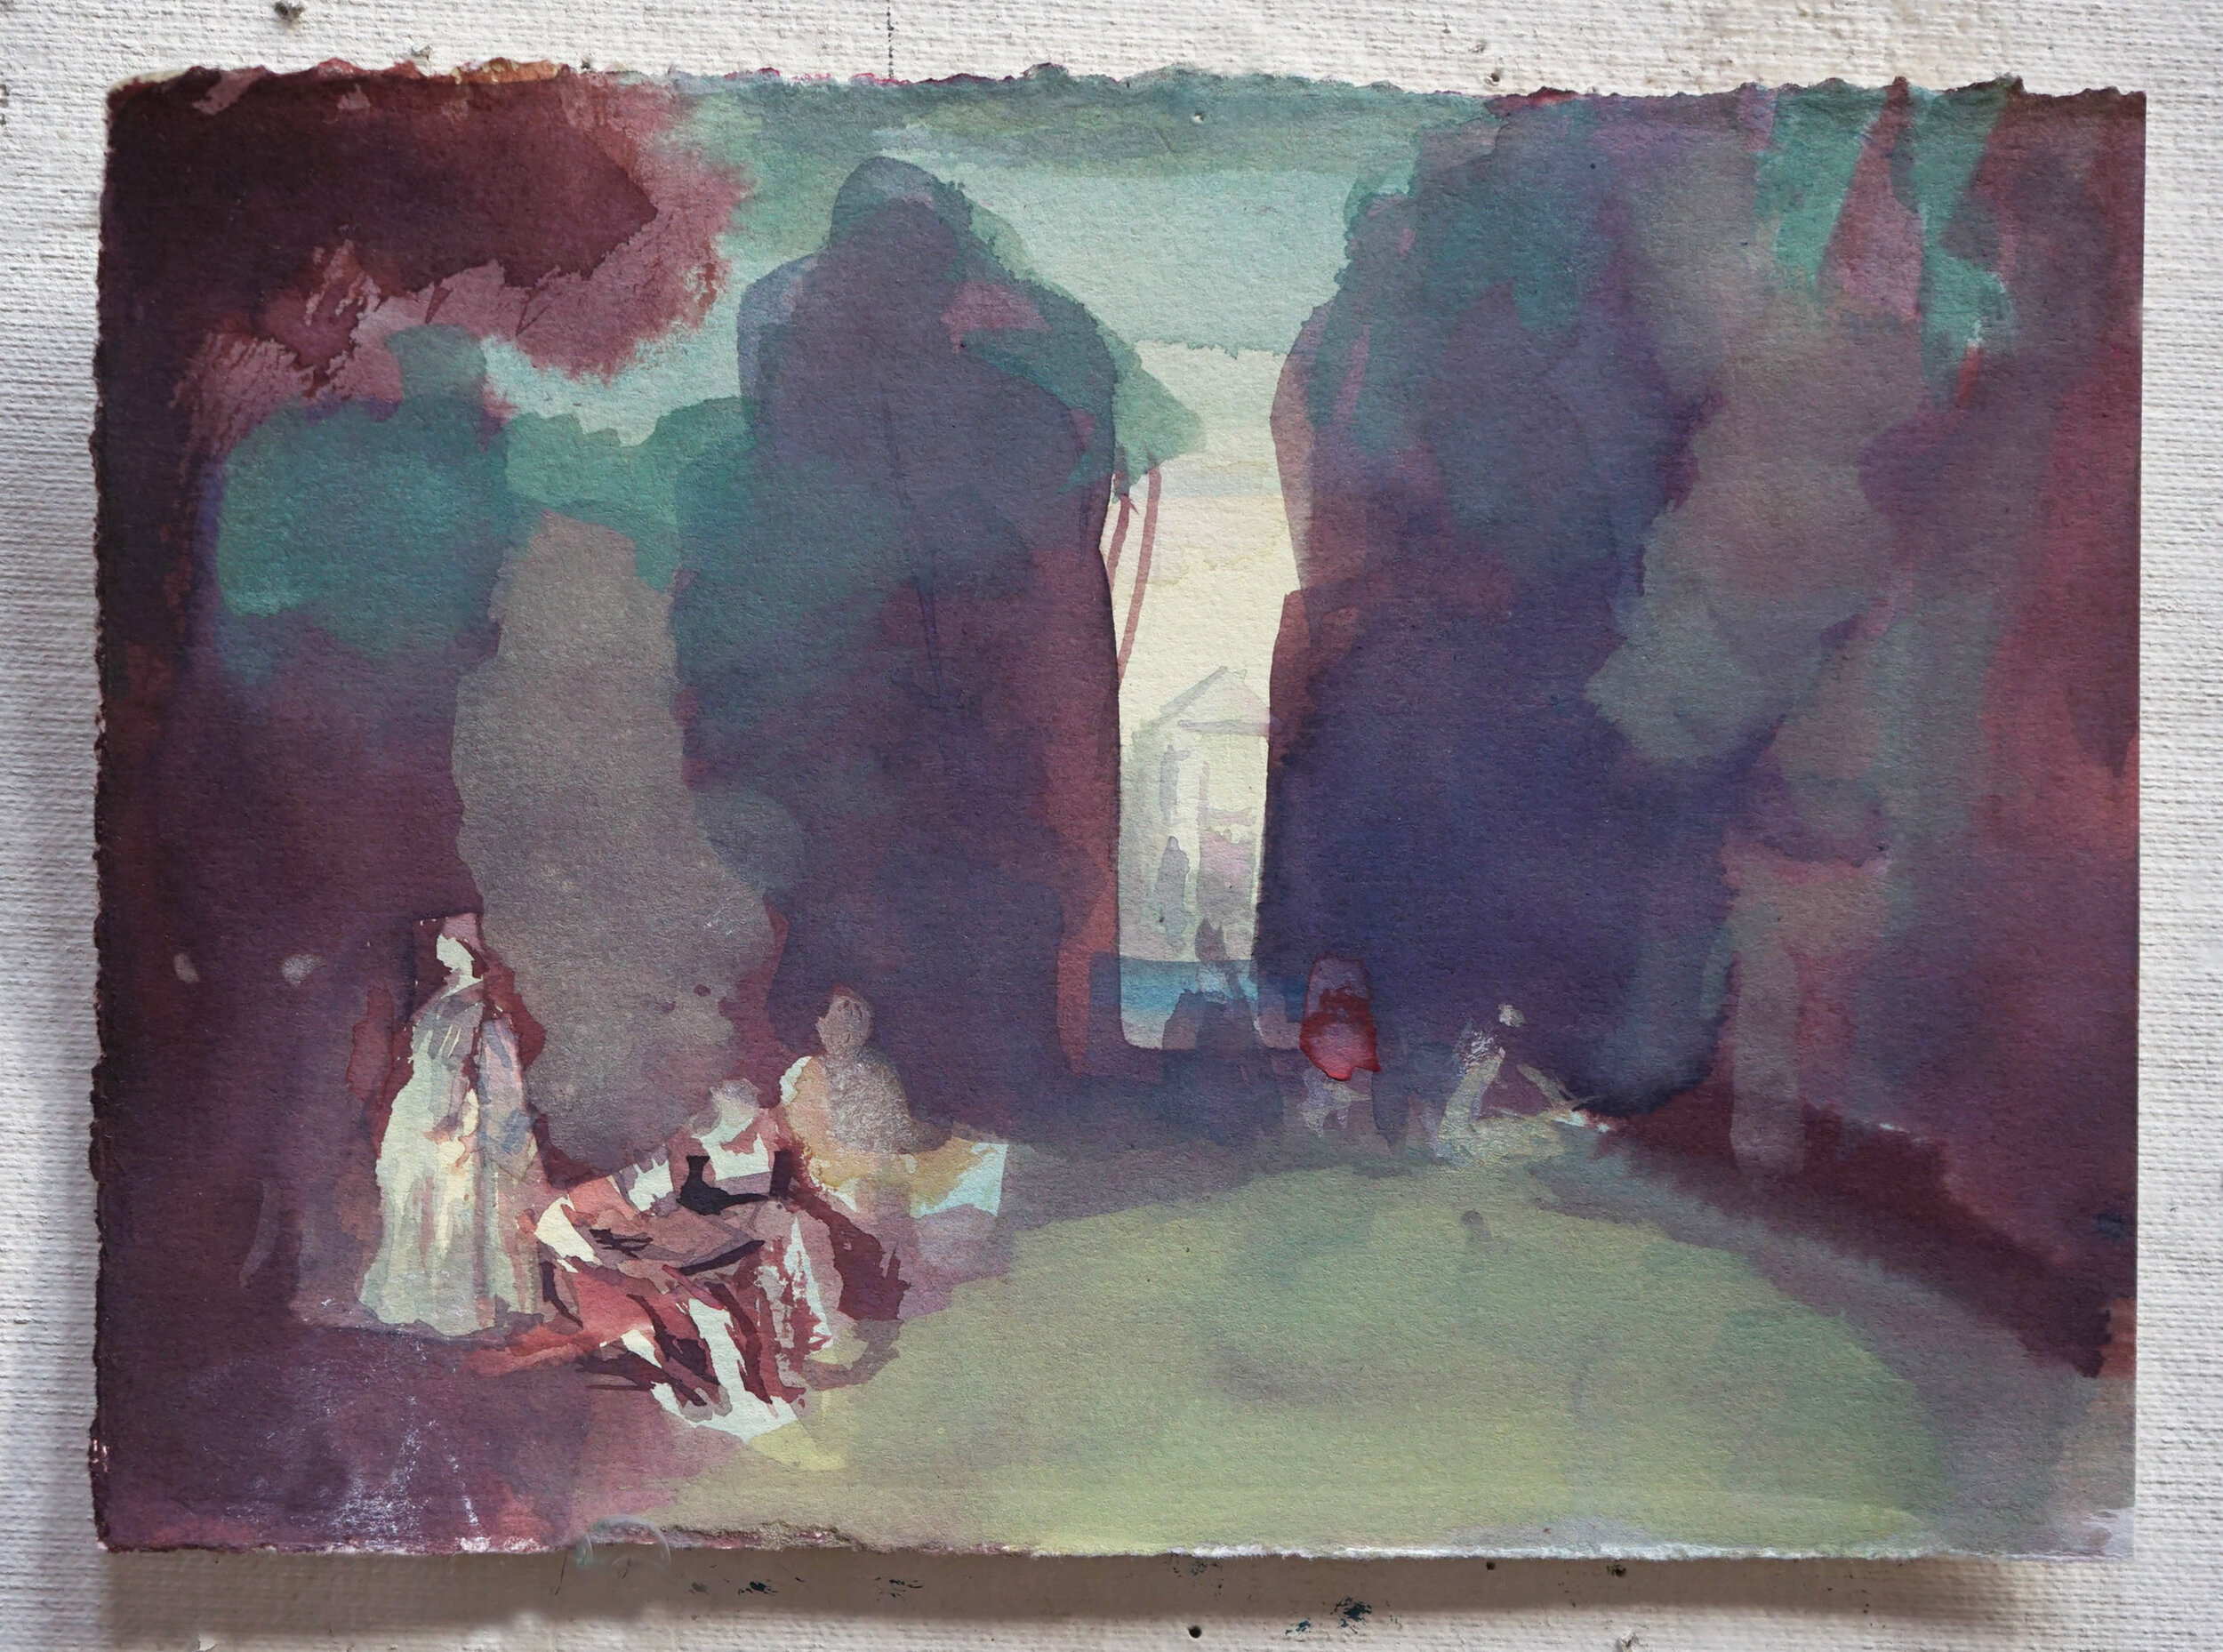 After Watteau, Park of Pierre Crozat, 5.75" x 7.25", Gouache and Ink on Paper, 2020 (sold)